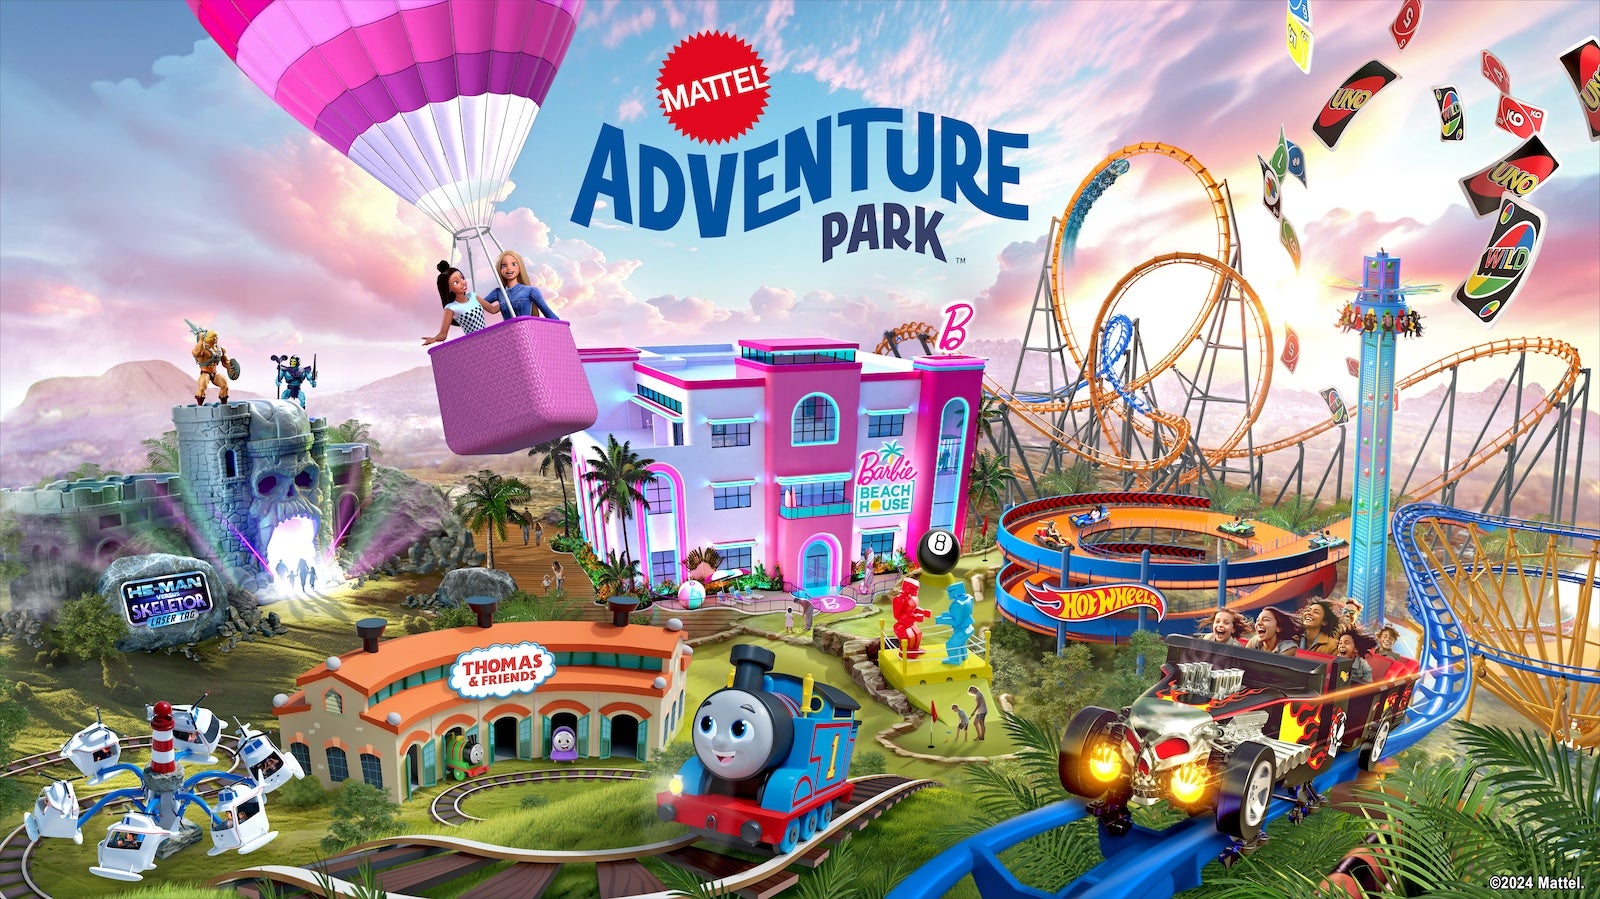 Second Mattel Adventure Park coming to Kansas City in 2026